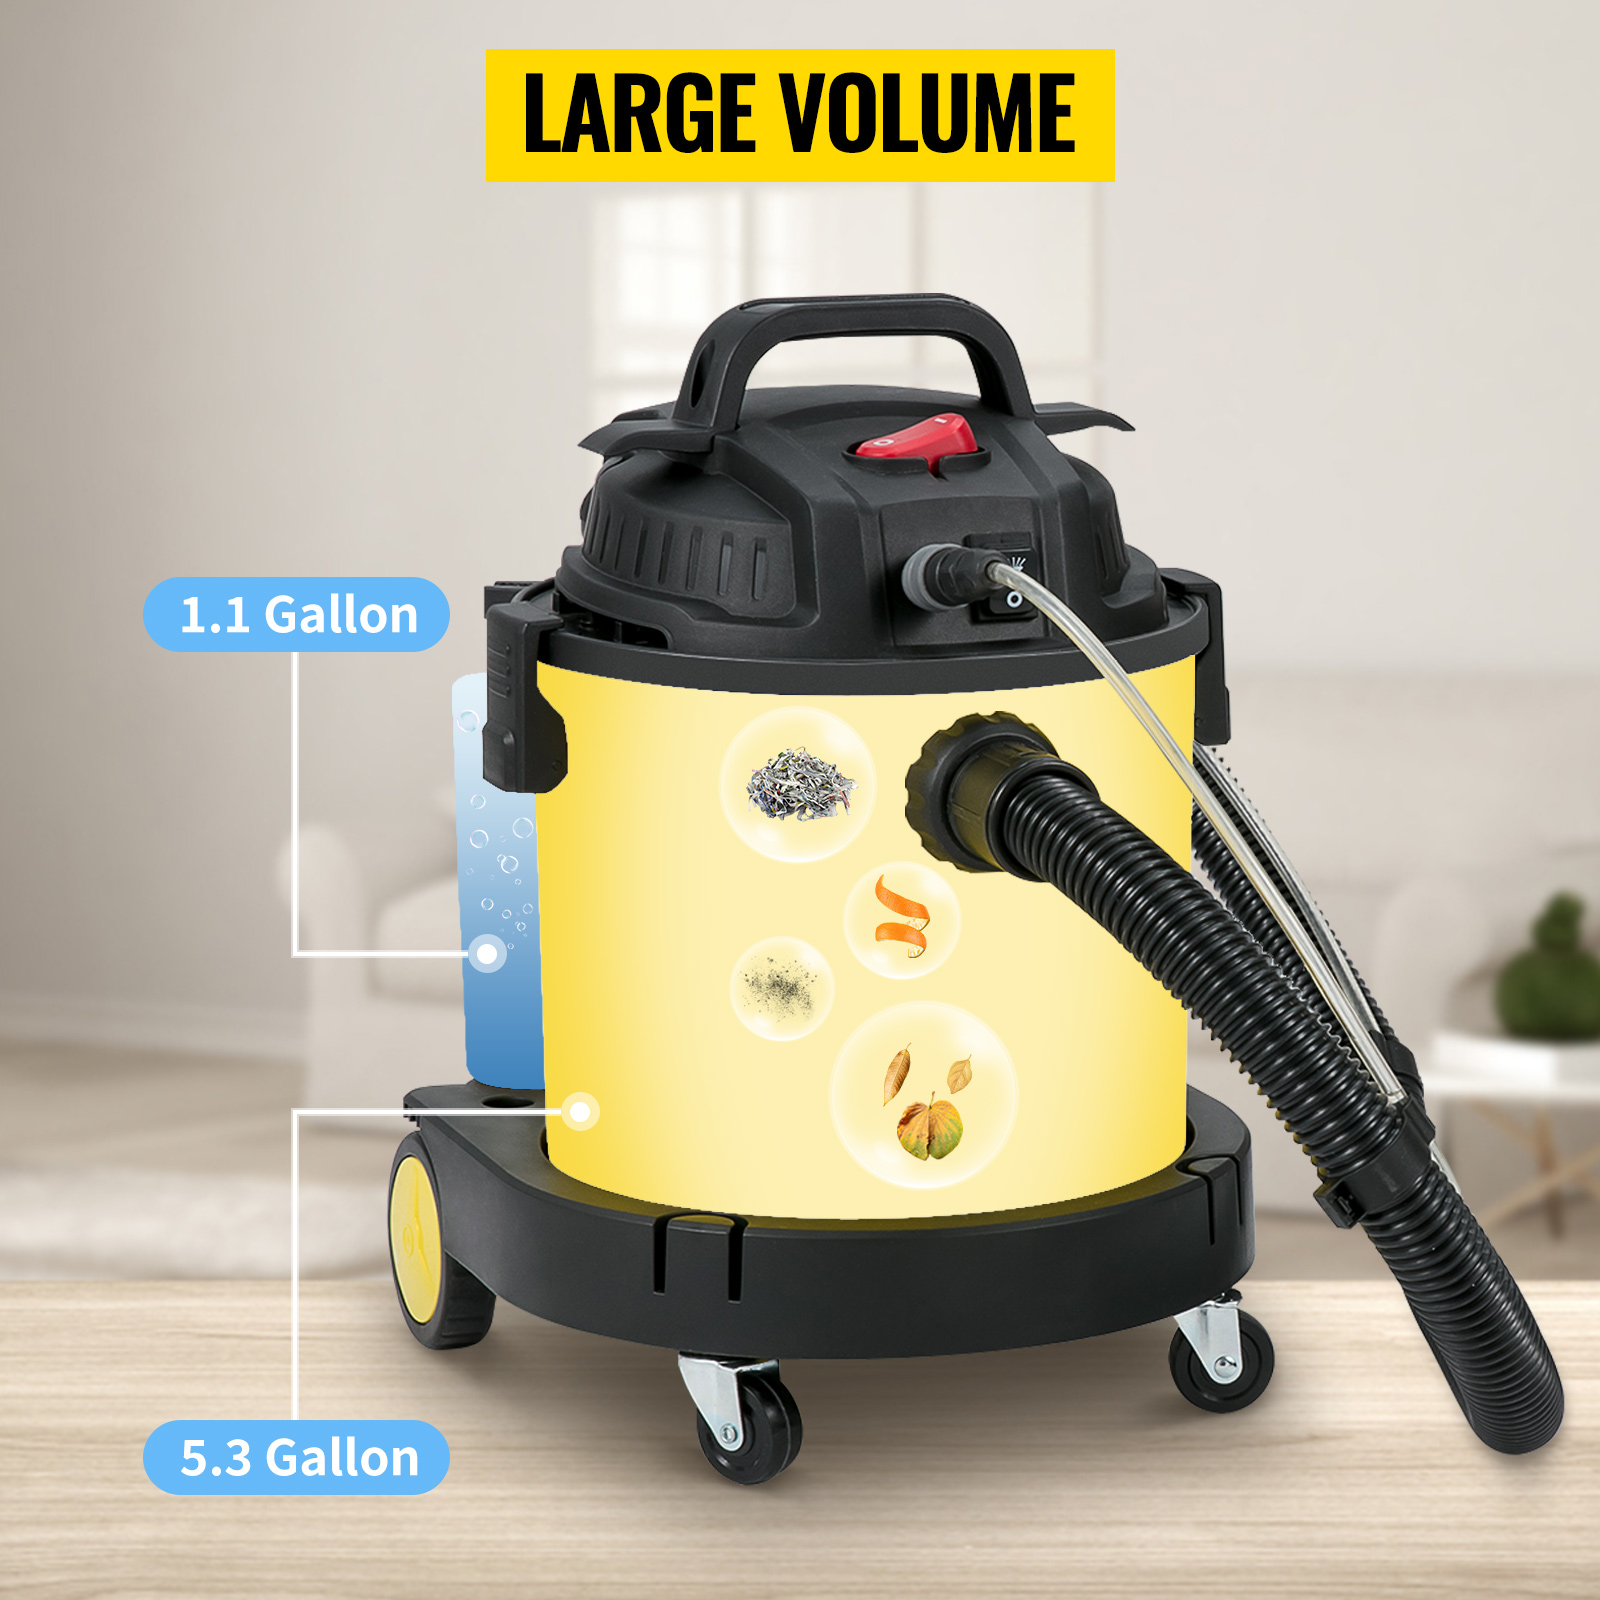 VEVOR VEVOR Dust Extractor Collector, 30L / 8 Gallon Capacity, HEPA  Filtration System Automatic Dust Shaking, 1200W Powerful Motor Wet & Dry  Vacuum Cleaner, Heavy-Duty Shop Vacuum with Attachments